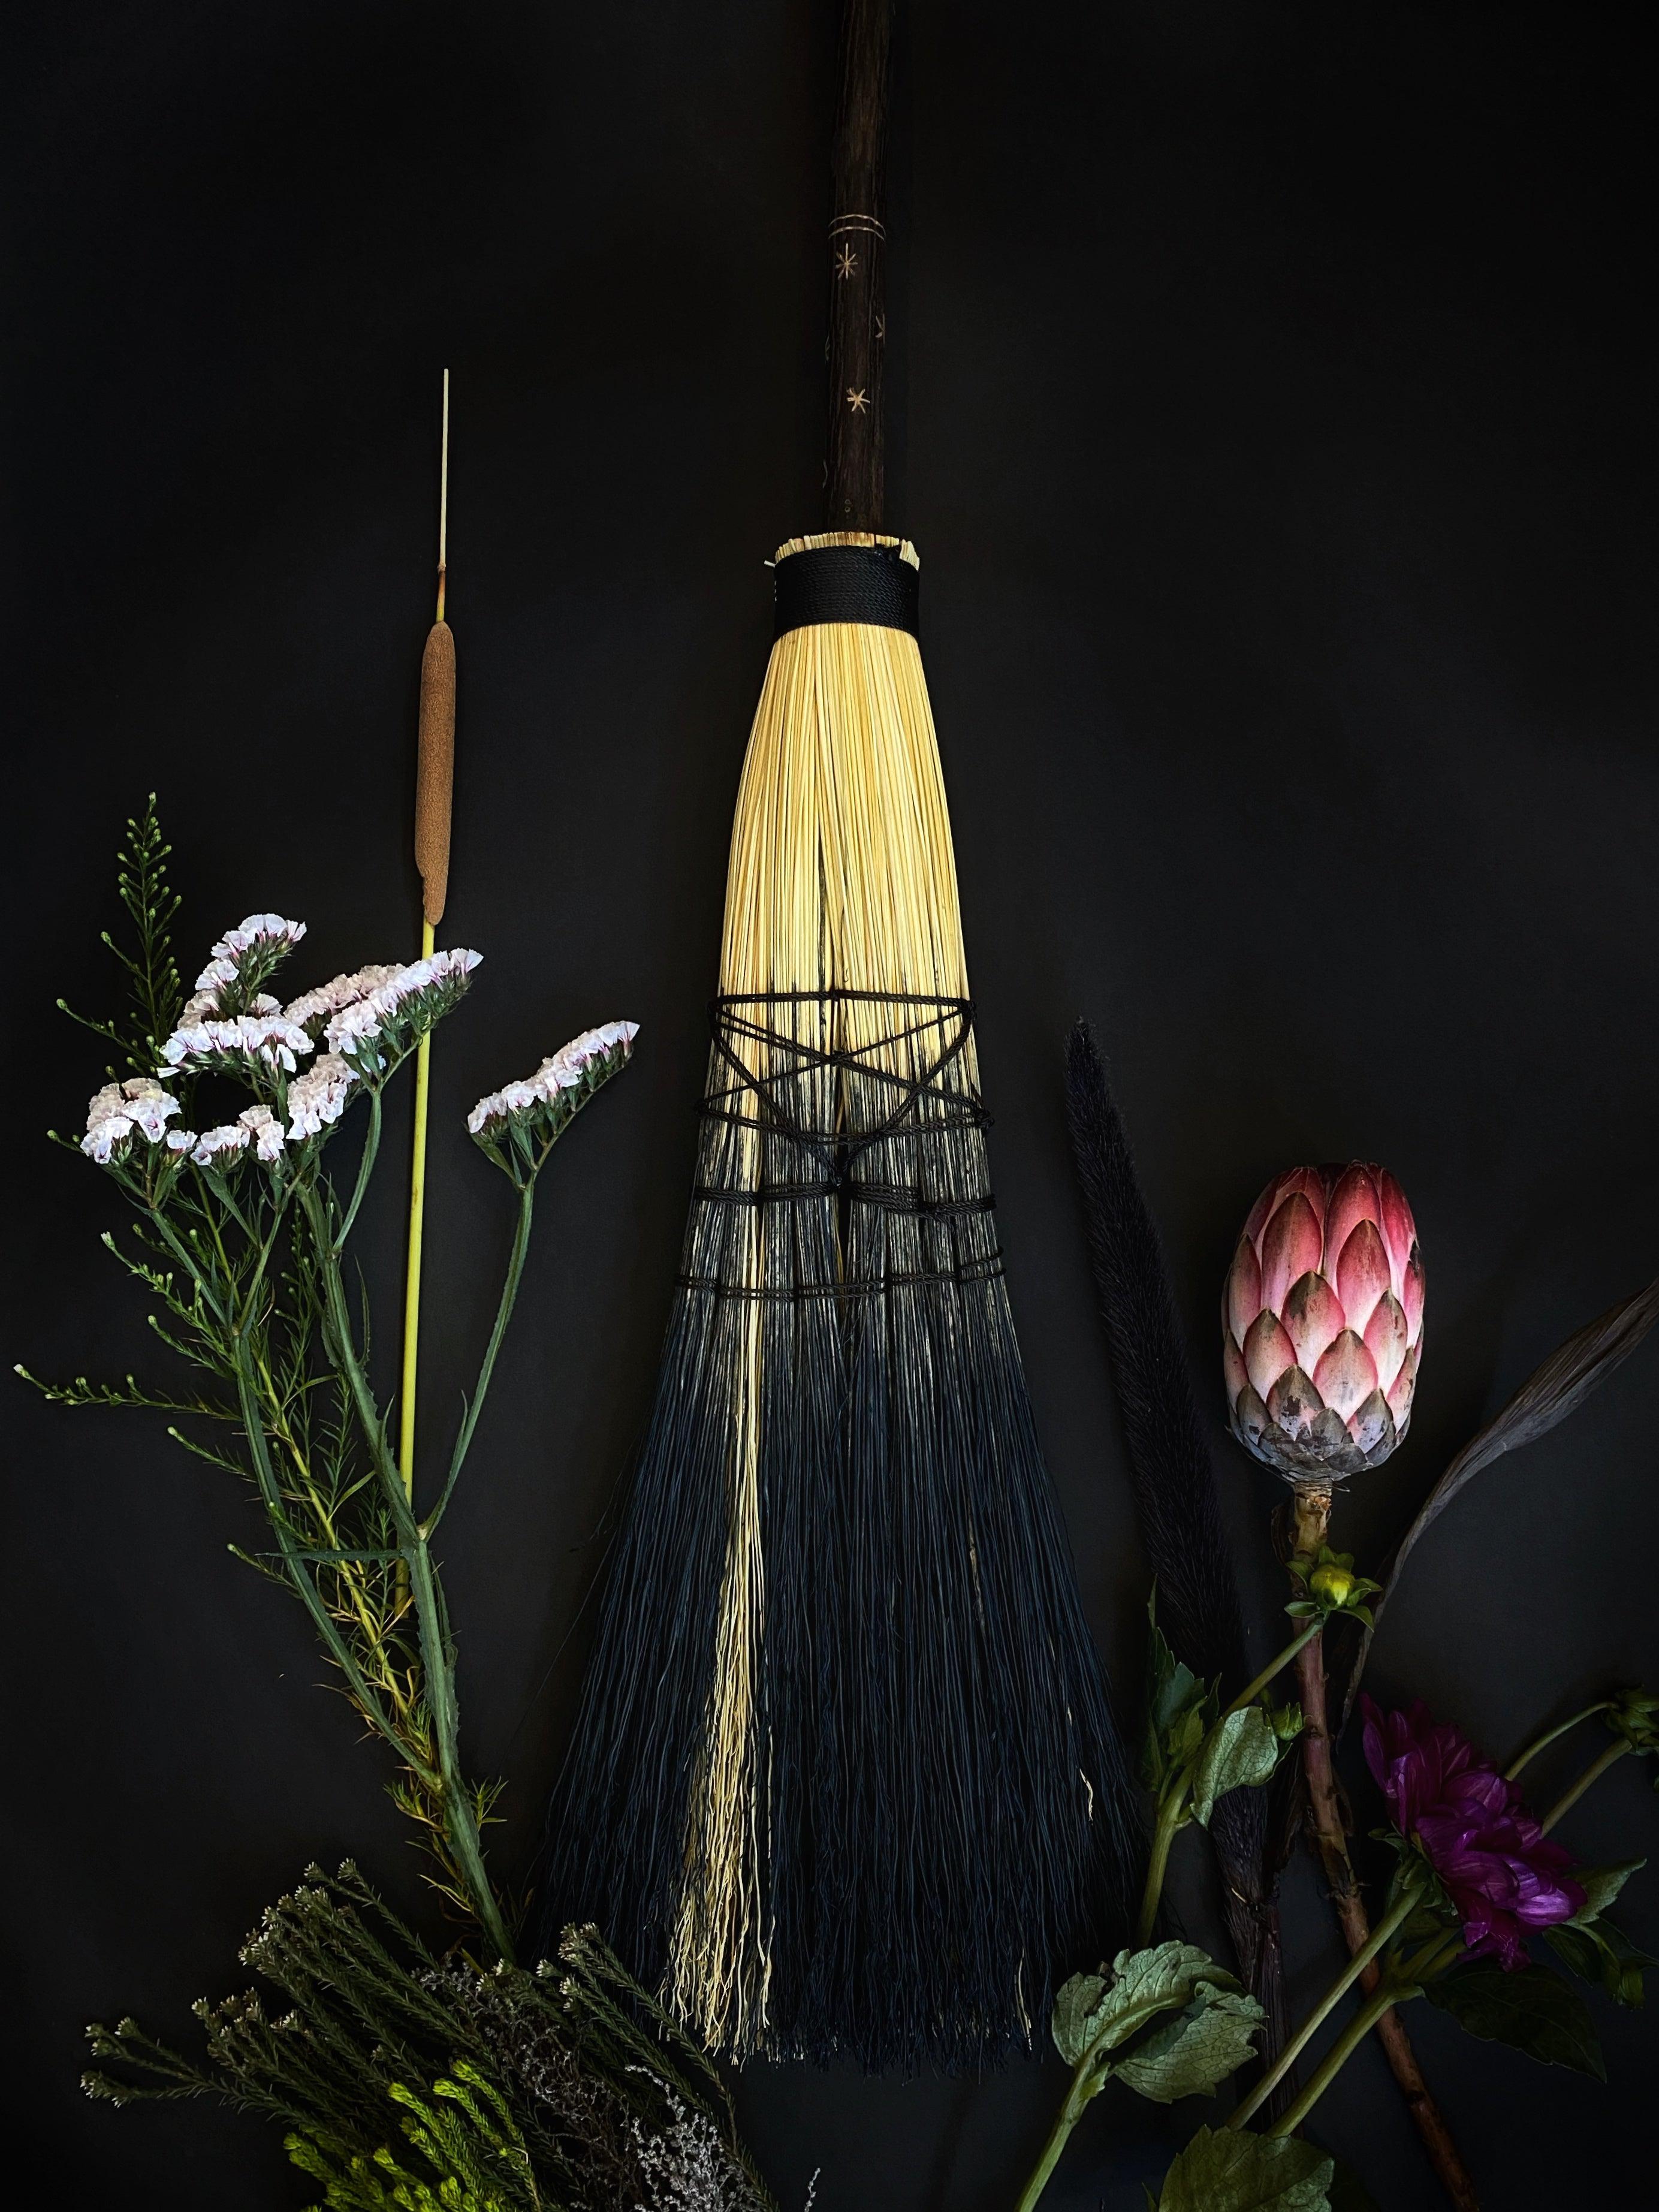 "Big Boss Witch" Sweeper Brooms - Kitchen Broom - Keven Craft Rituals